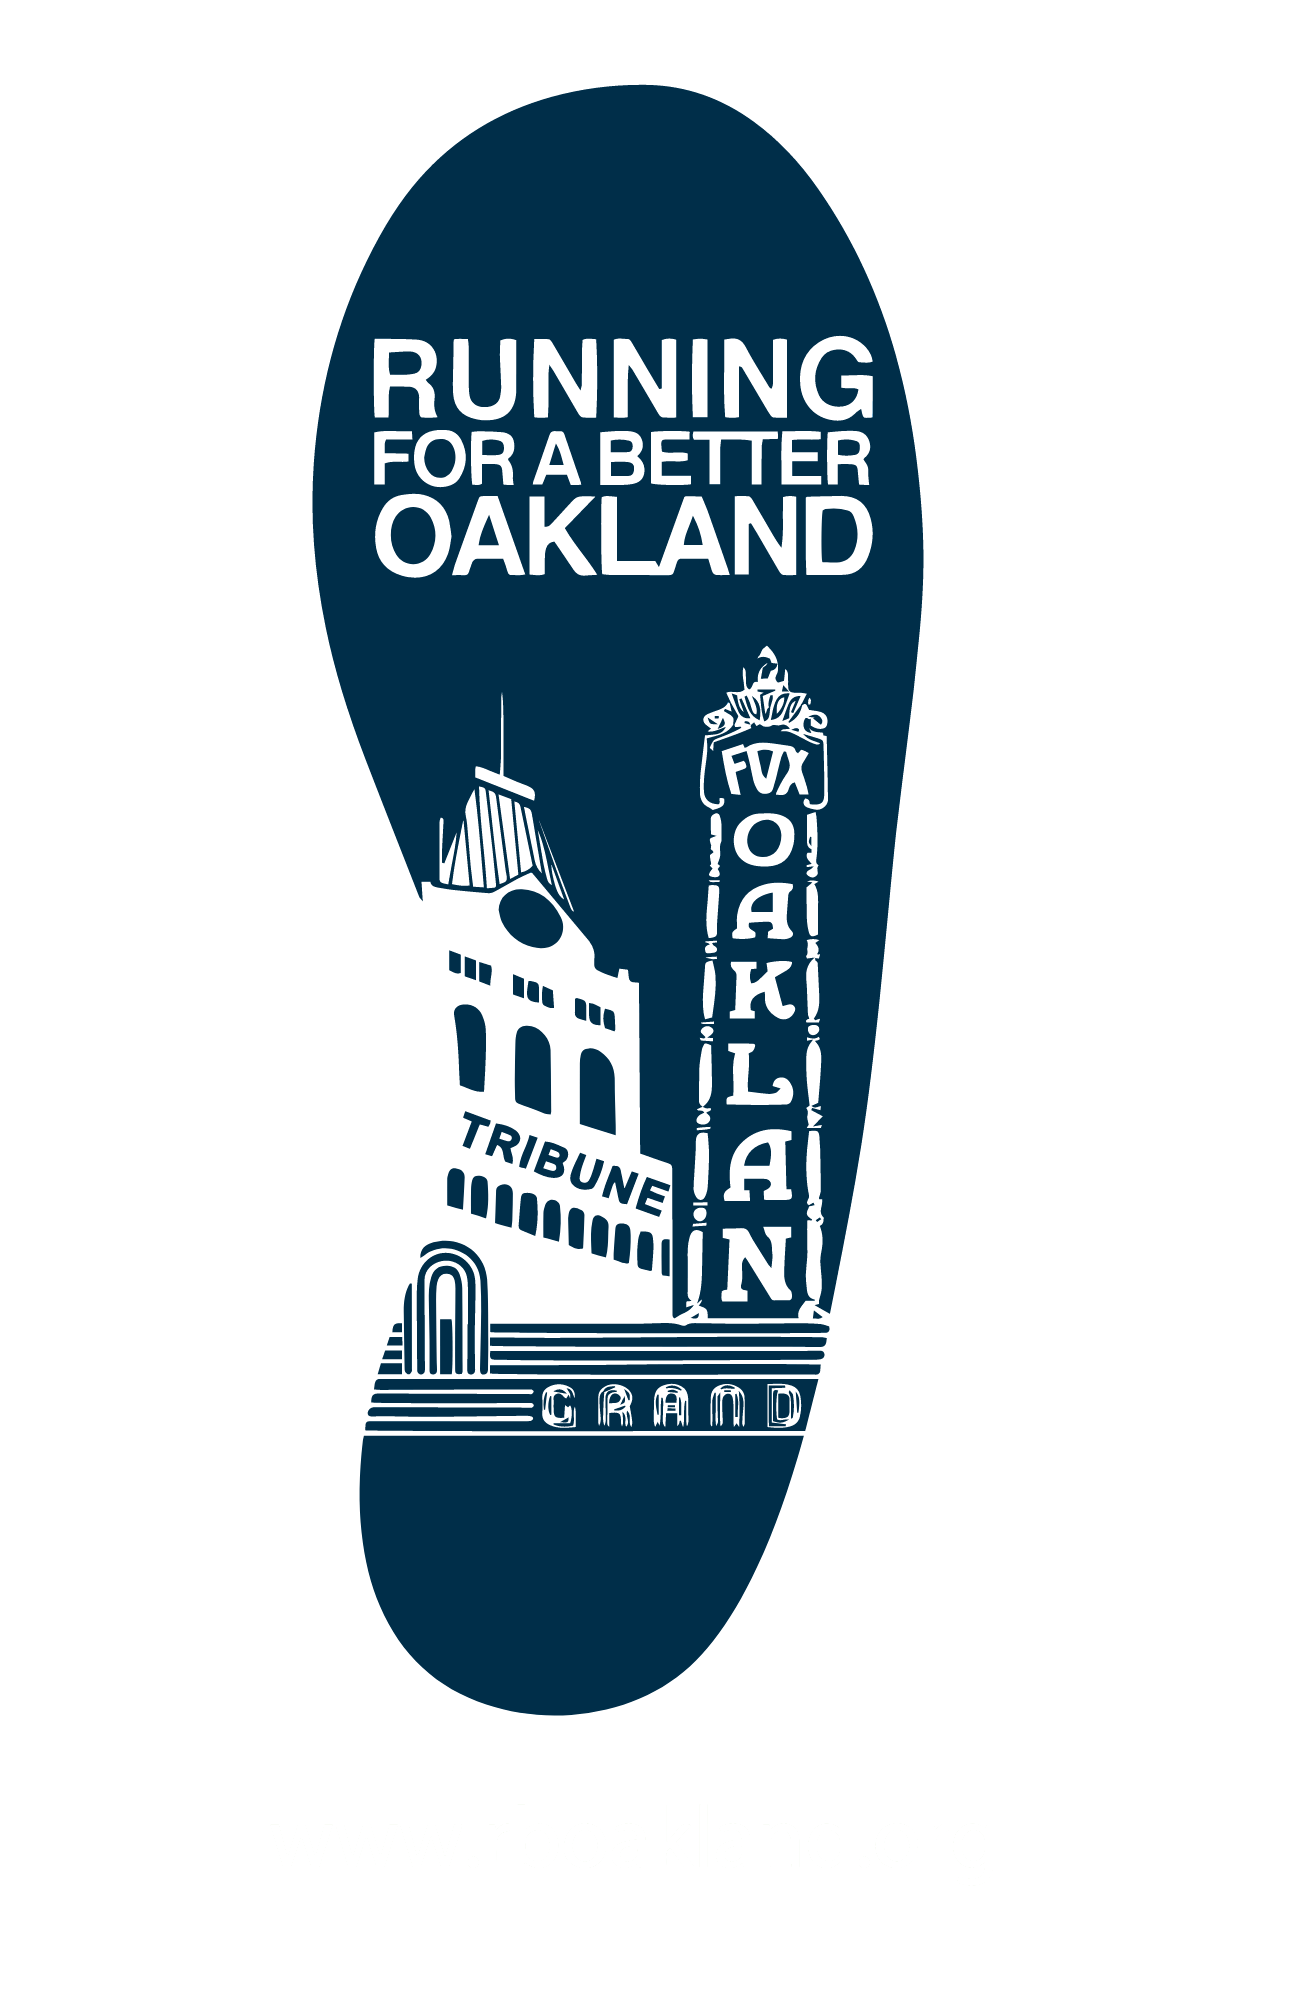 Running for a Better Oakland (RBO)